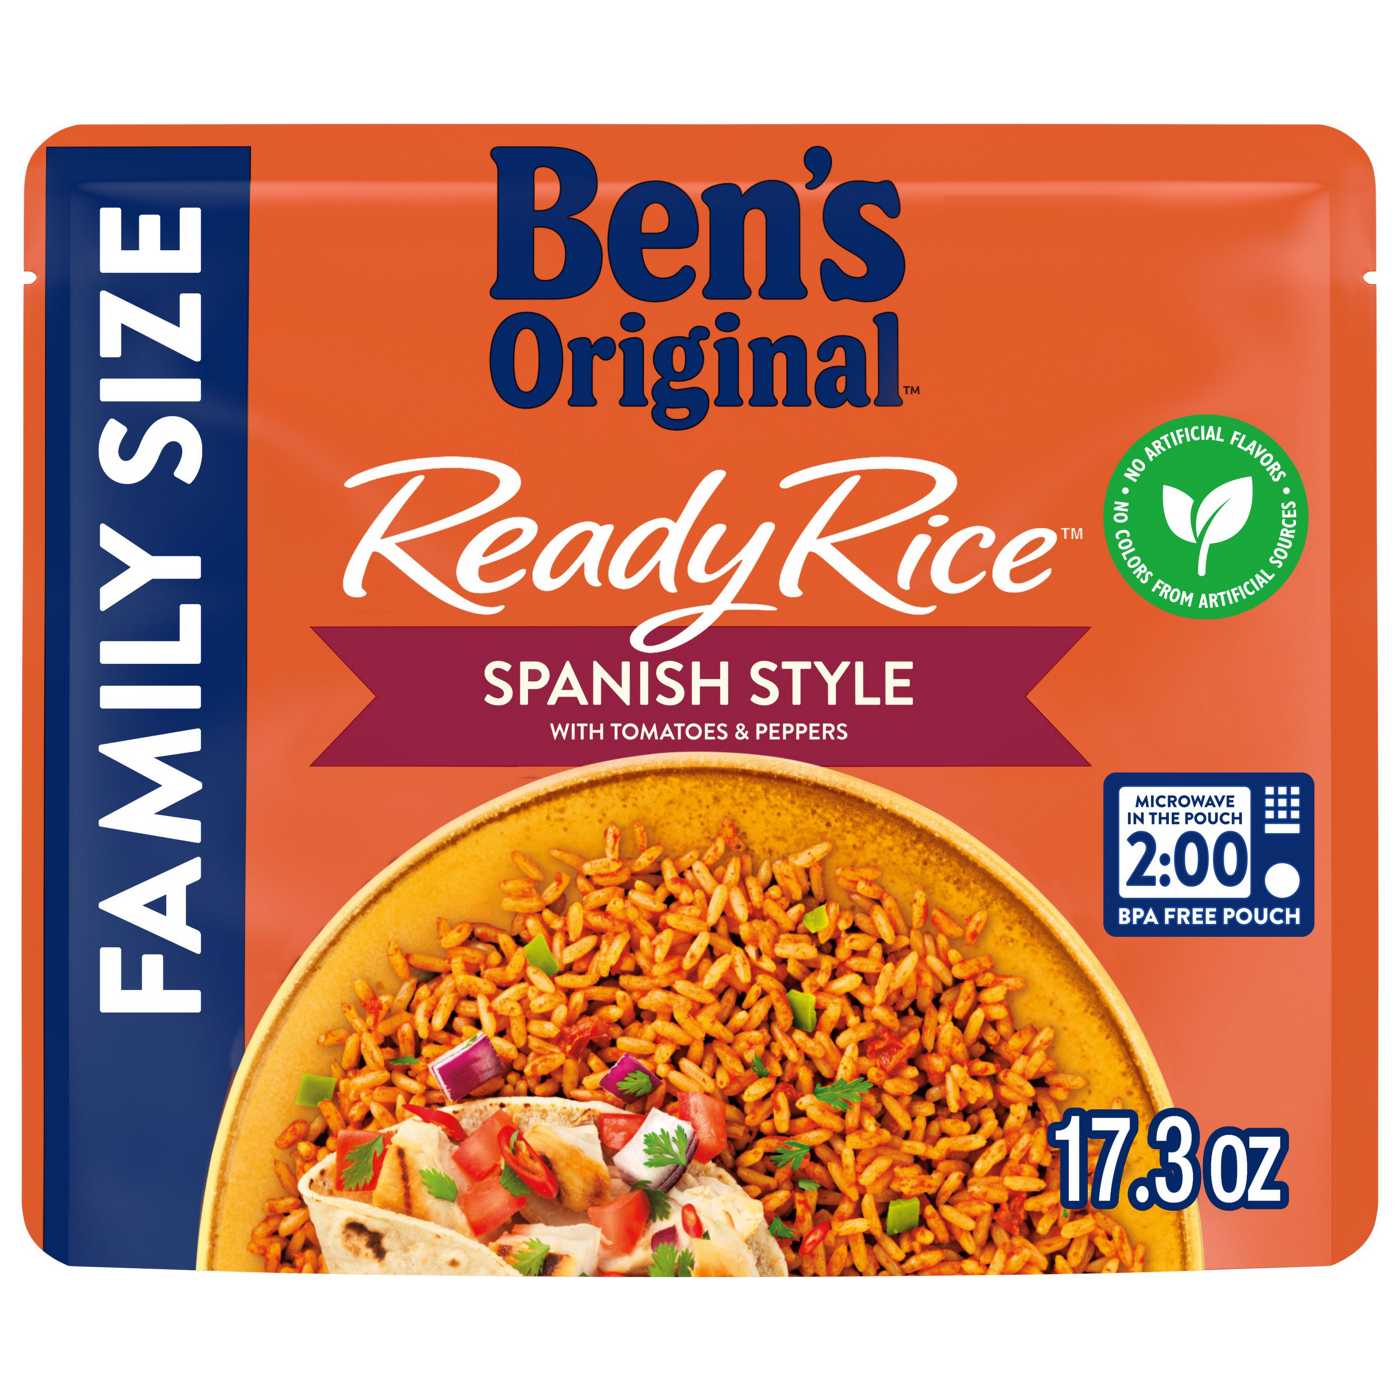 Ben's Original Ready Rice Spanish Style Flavored Family Size Rice; image 1 of 7